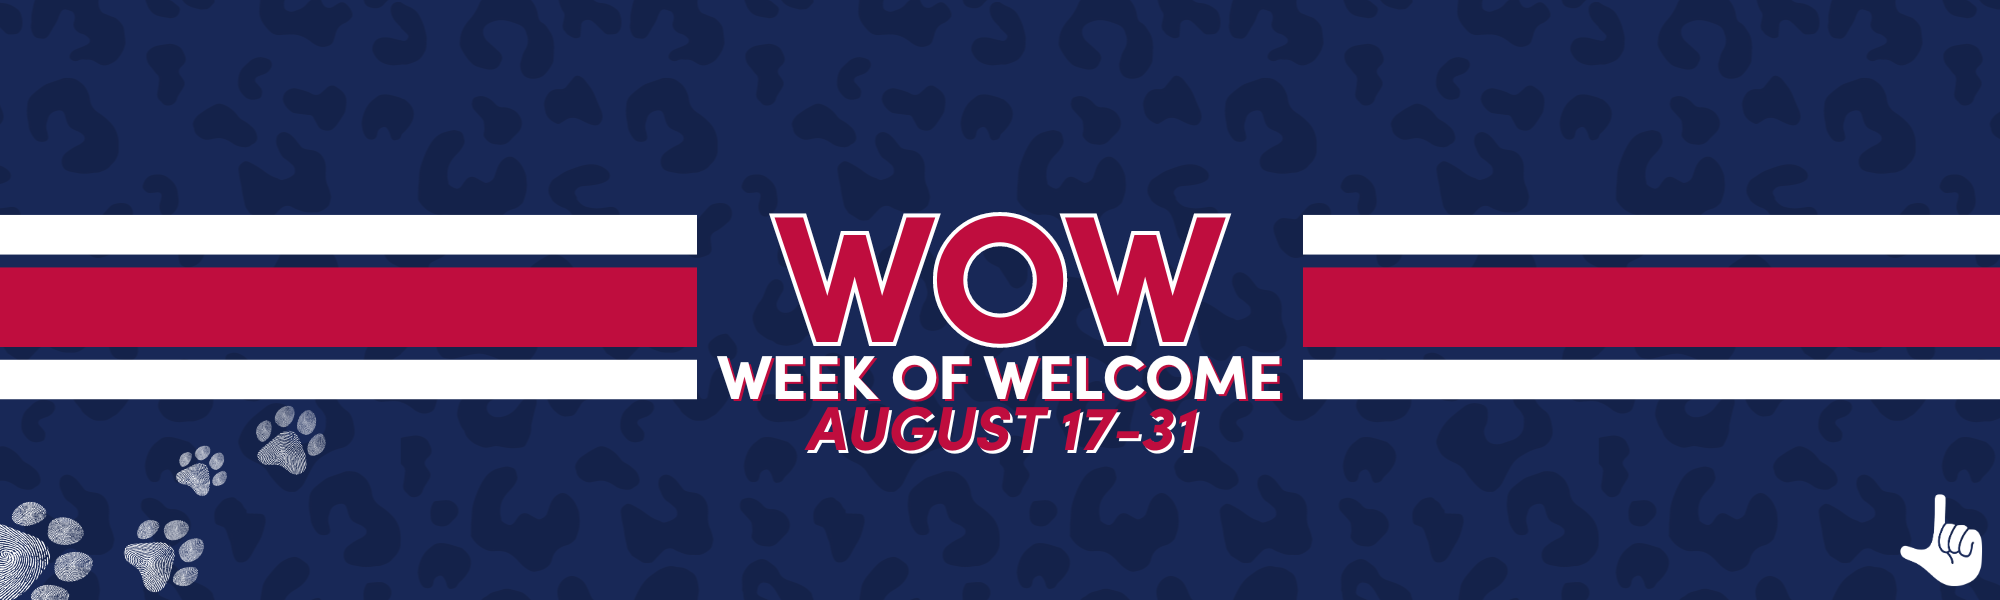 WOW Week of Welcome August 17-31